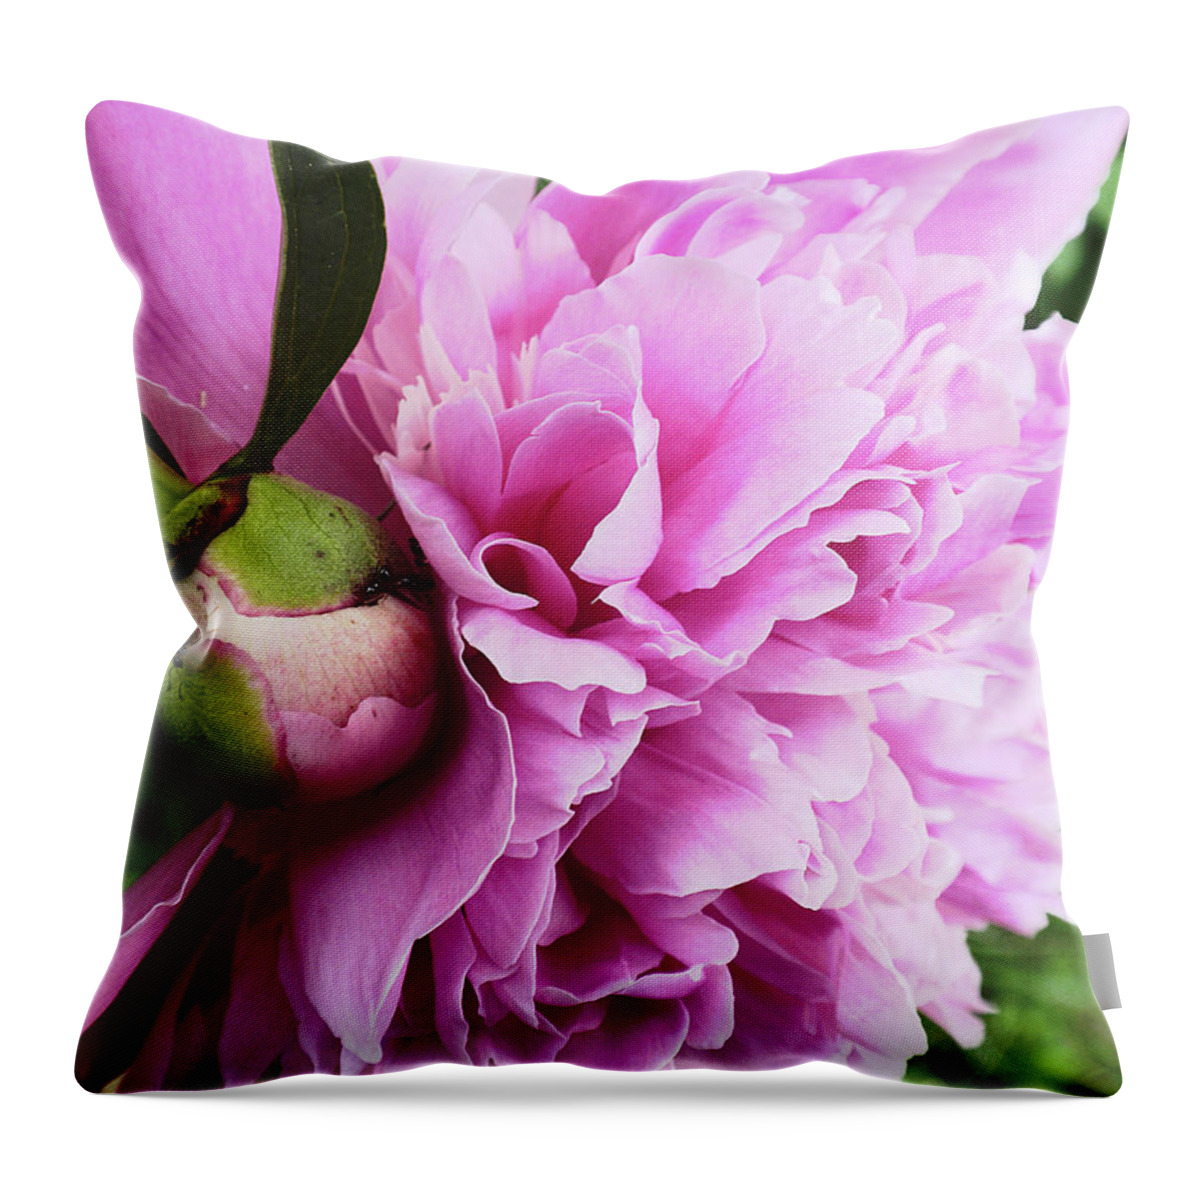 Pink Throw Pillow featuring the photograph Pink Peony by Kristen Cavanaugh